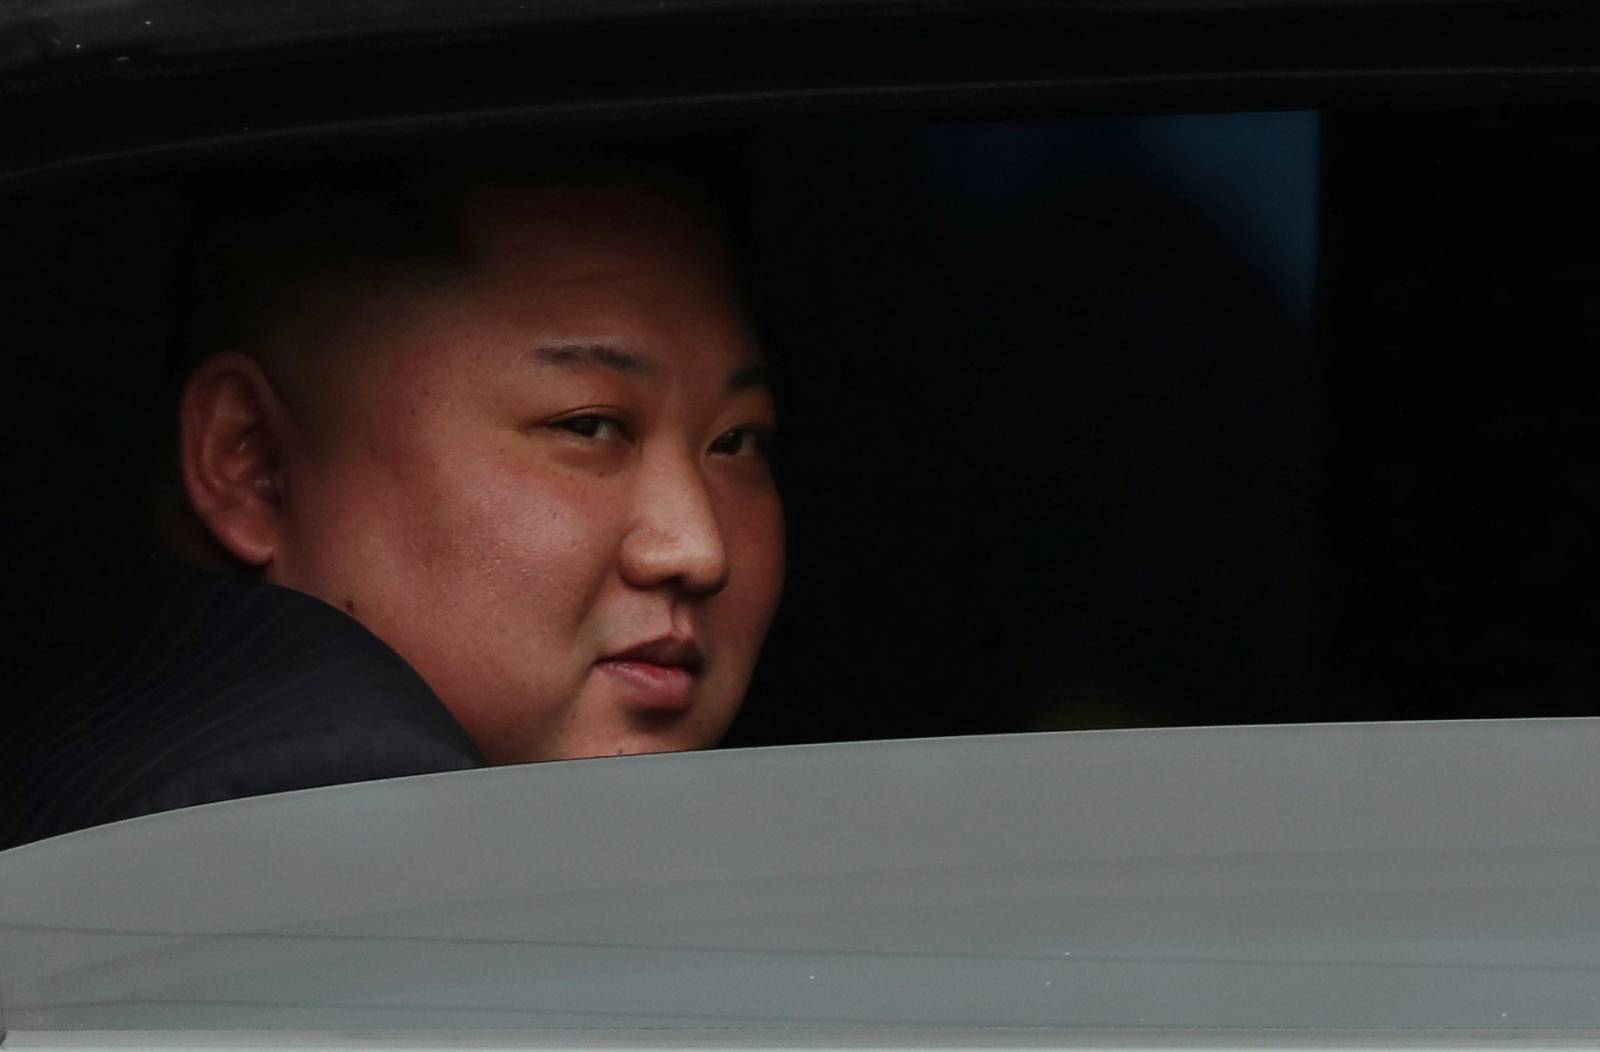 North Korea's leader Kim Jong Un sits in his vehicle after arriving at the Dong Dang railway station